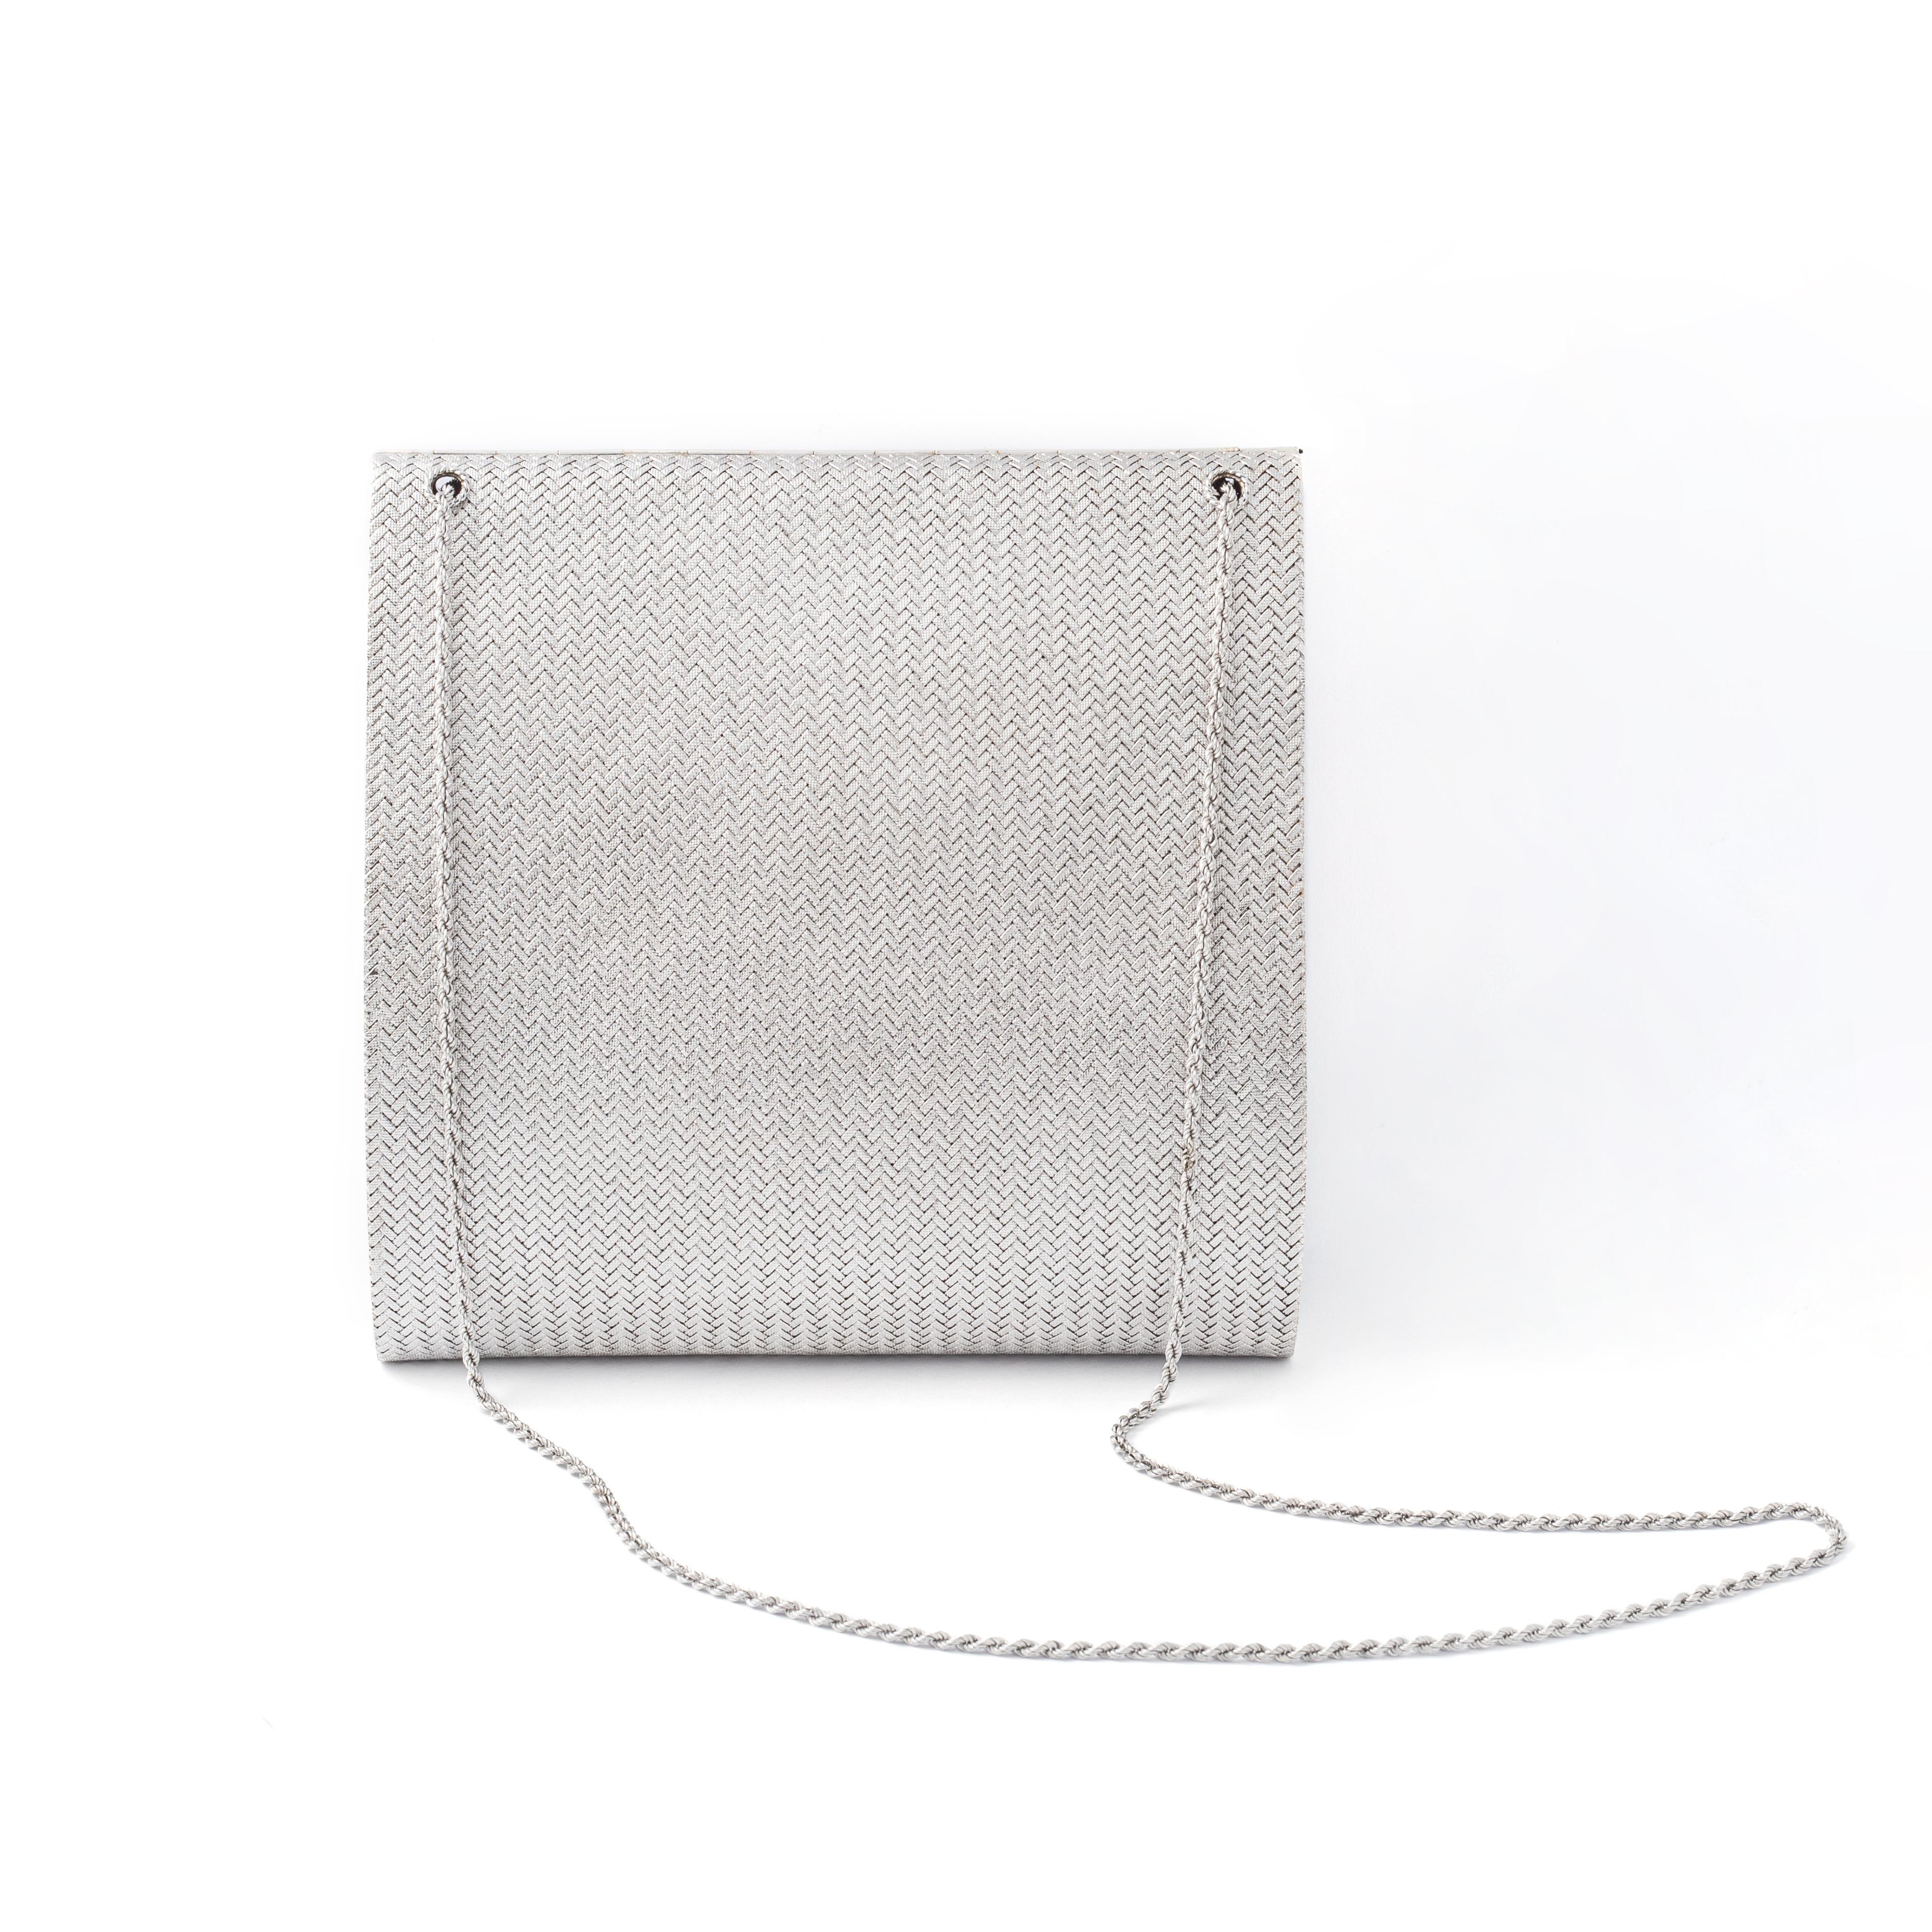 Diamond white gold evening bag. 
Interior includes a mirror. 
Circa 1980.

Total height: approx. 15.00 centimeters.
Total length: approx. 14.10 centimeters.
Total depth: approx. 1.50 centimeters up to 4.40 centimeters.
Total weight: 462.80